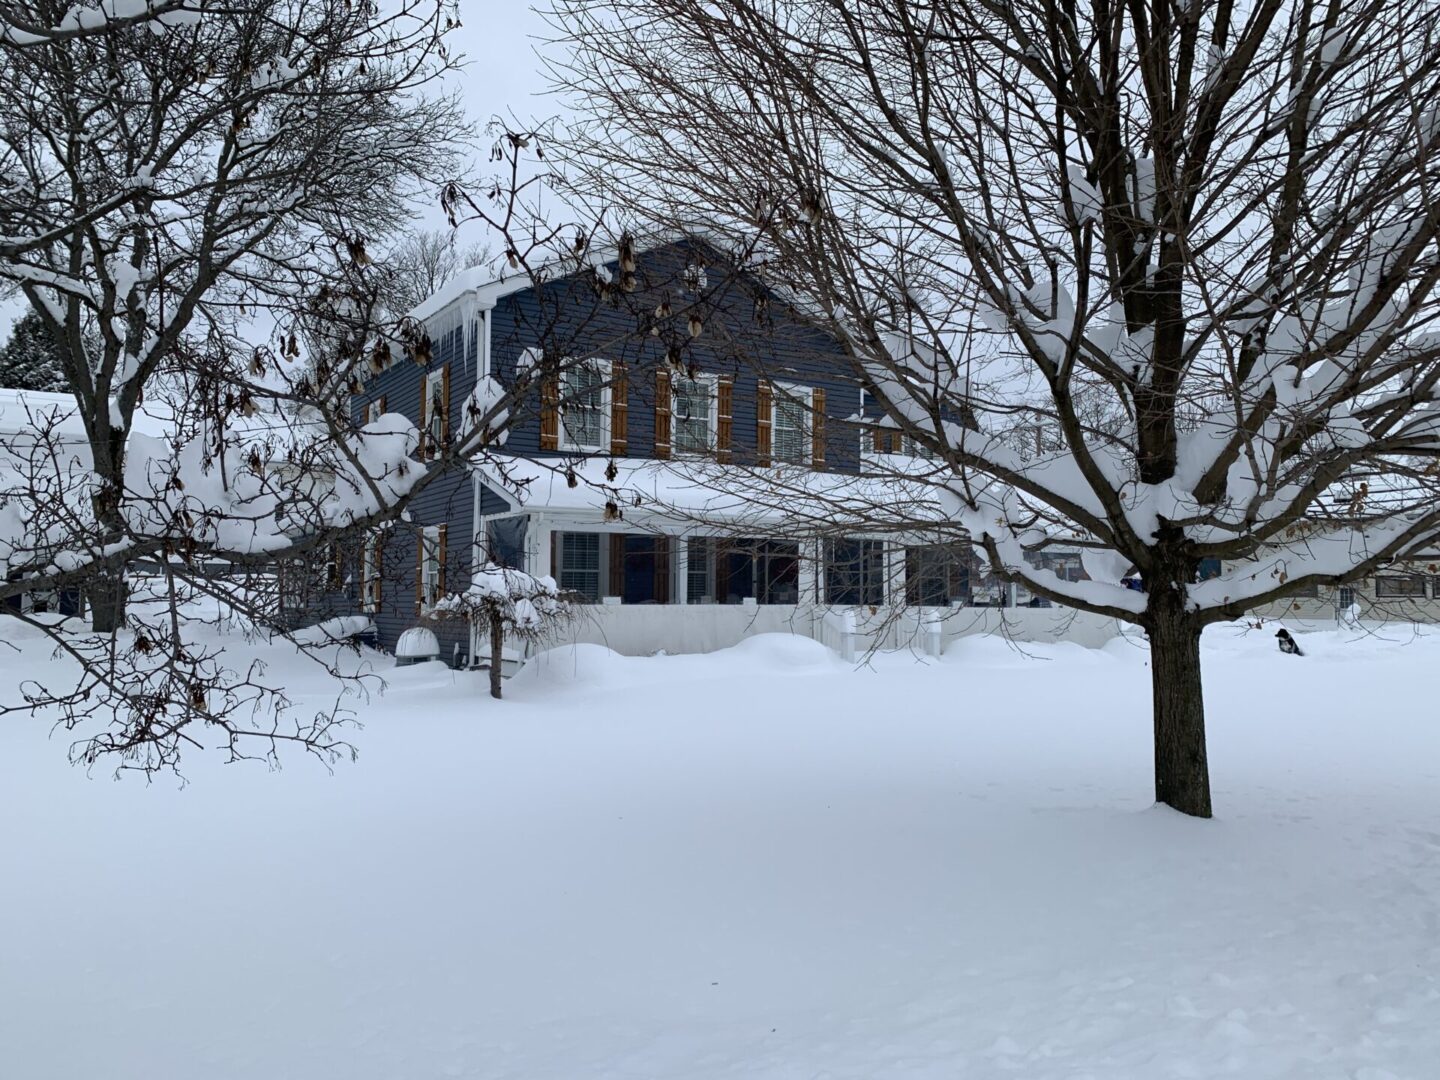 A house with snow on the ground and trees